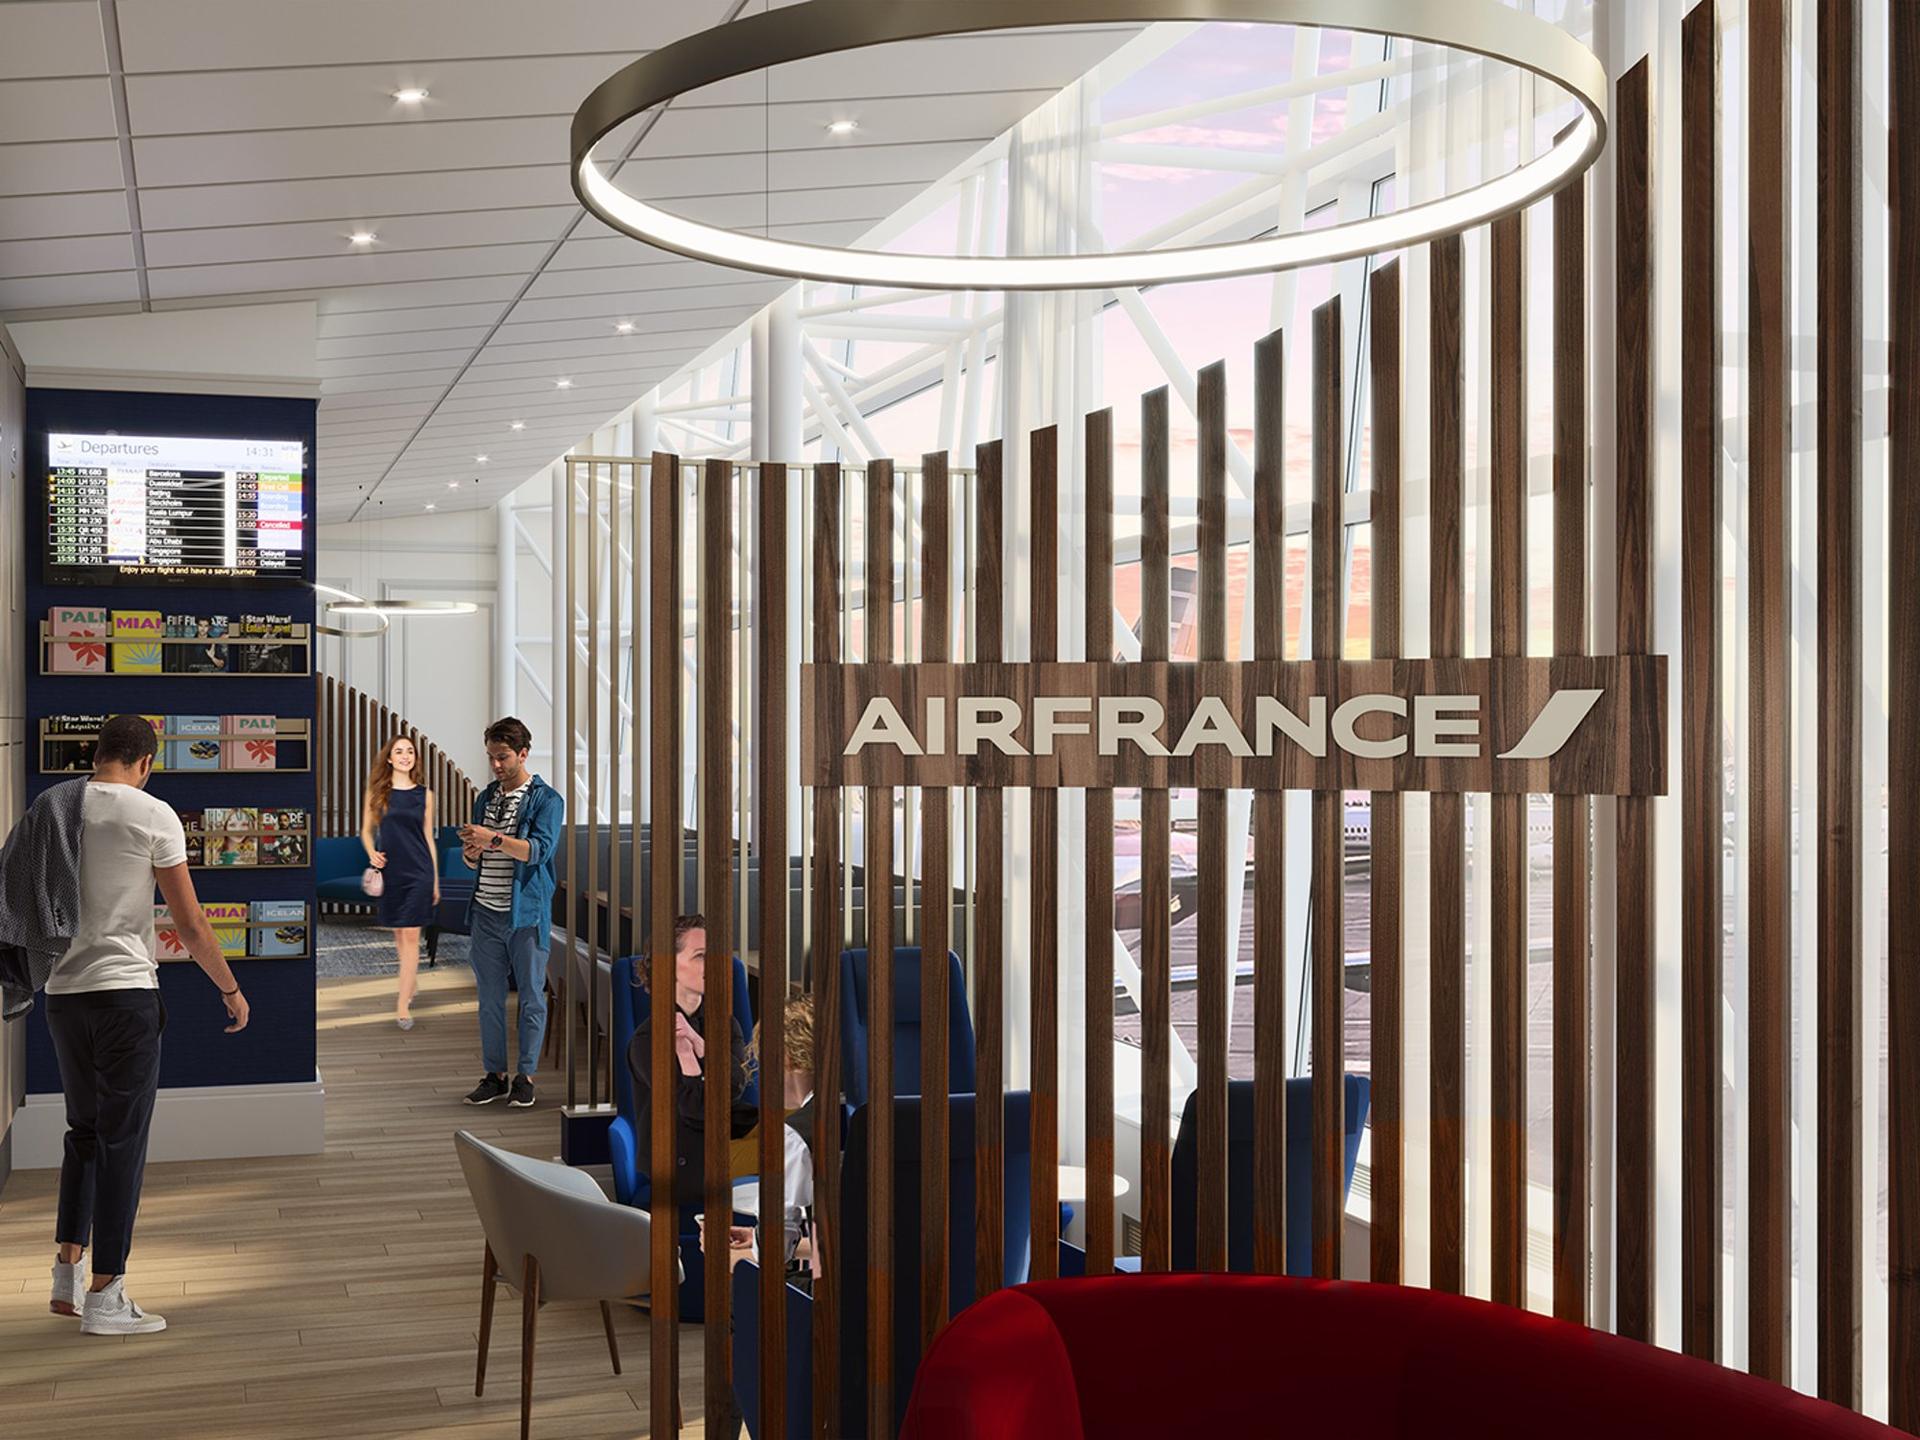 Air France/KLM Lounge operated by Plaza Premium Group image 1 of 10